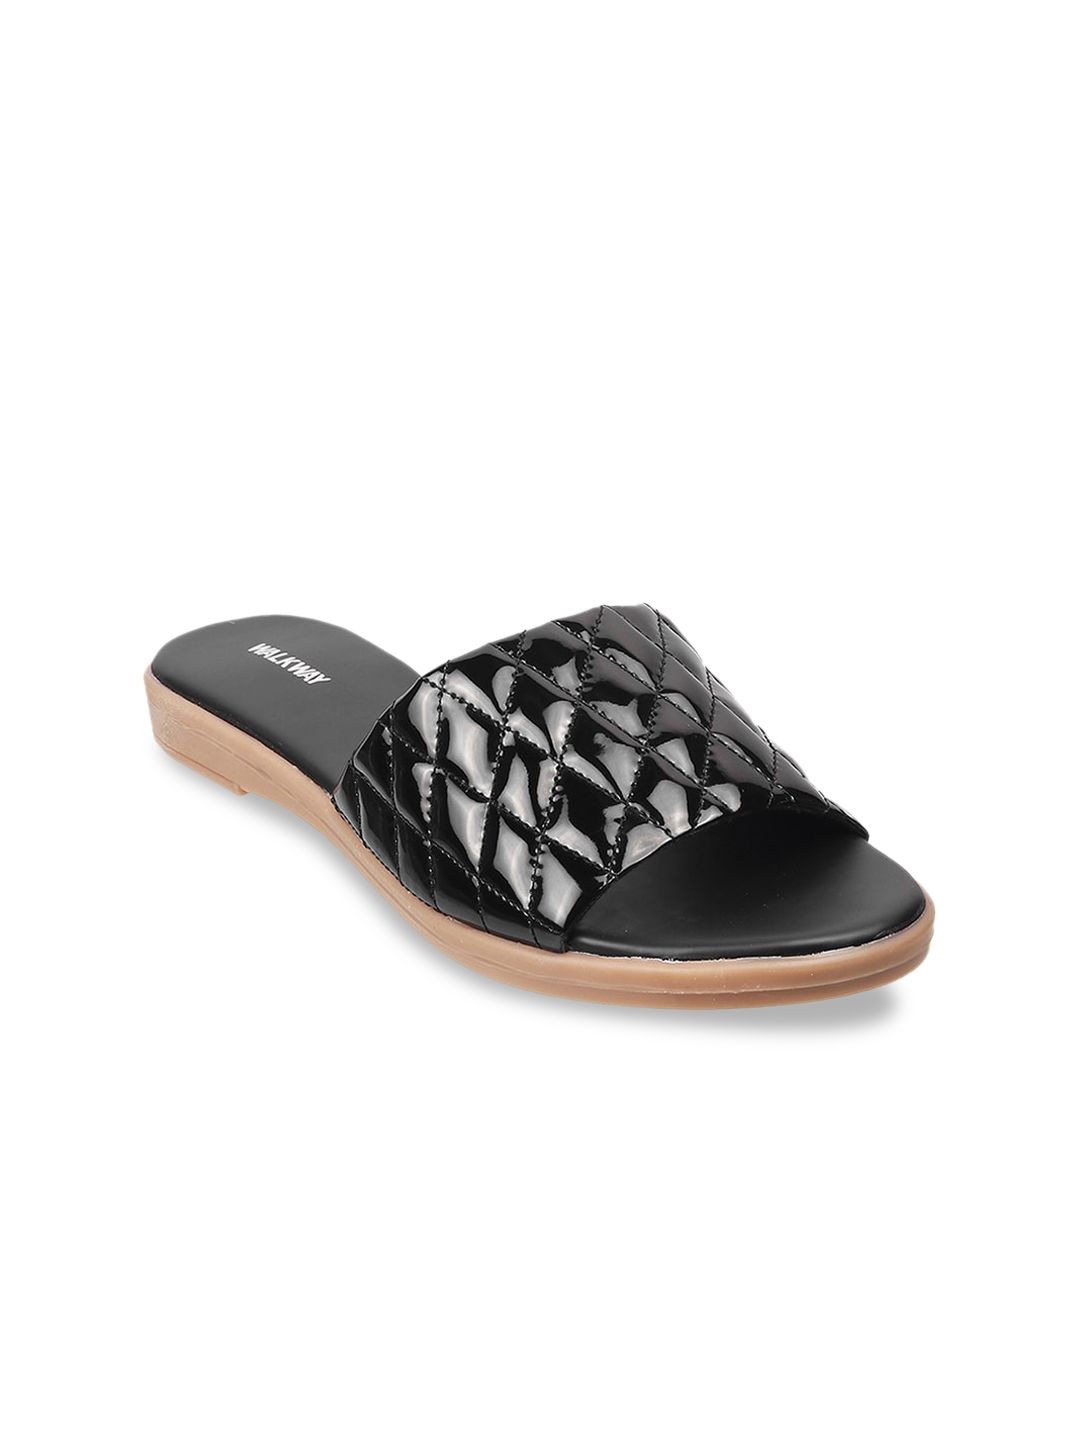 WALKWAY by Metro Women Black Quilted Open Toe Flats Price in India